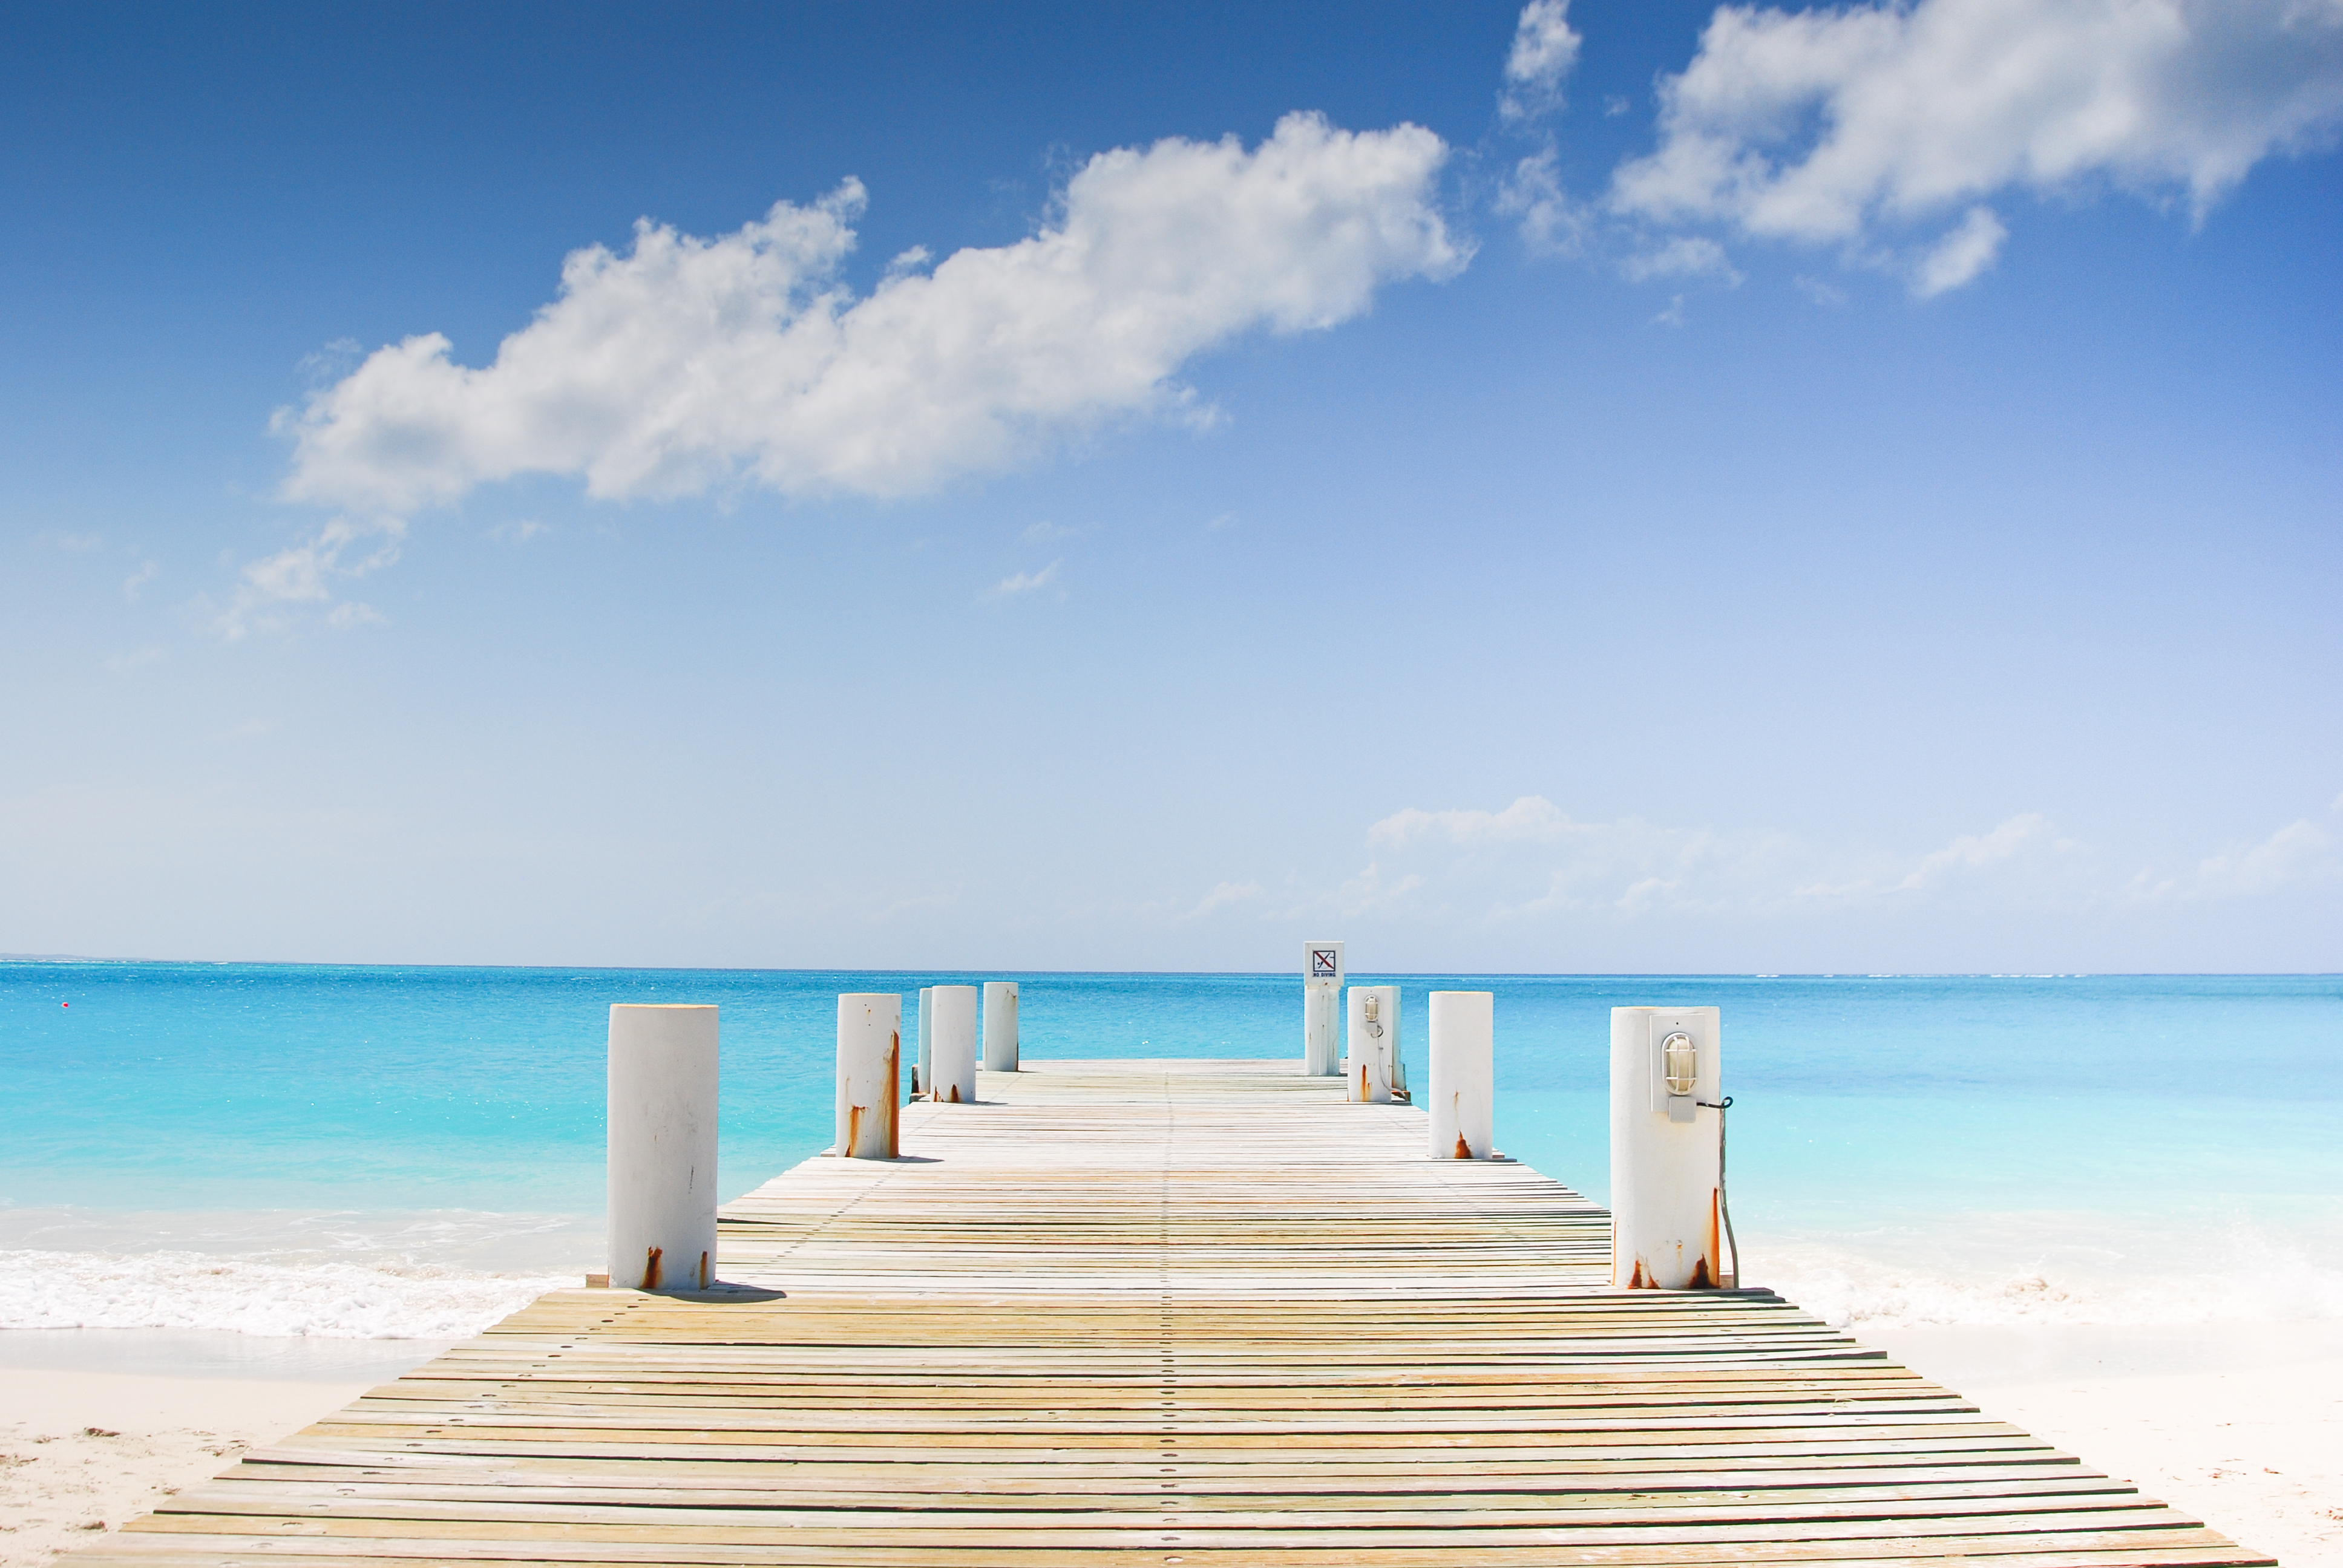 A beautiful day looking out onto the jetty in Providenciales, Turks and Caicos (Justin Goode&mdash;Getty Images)